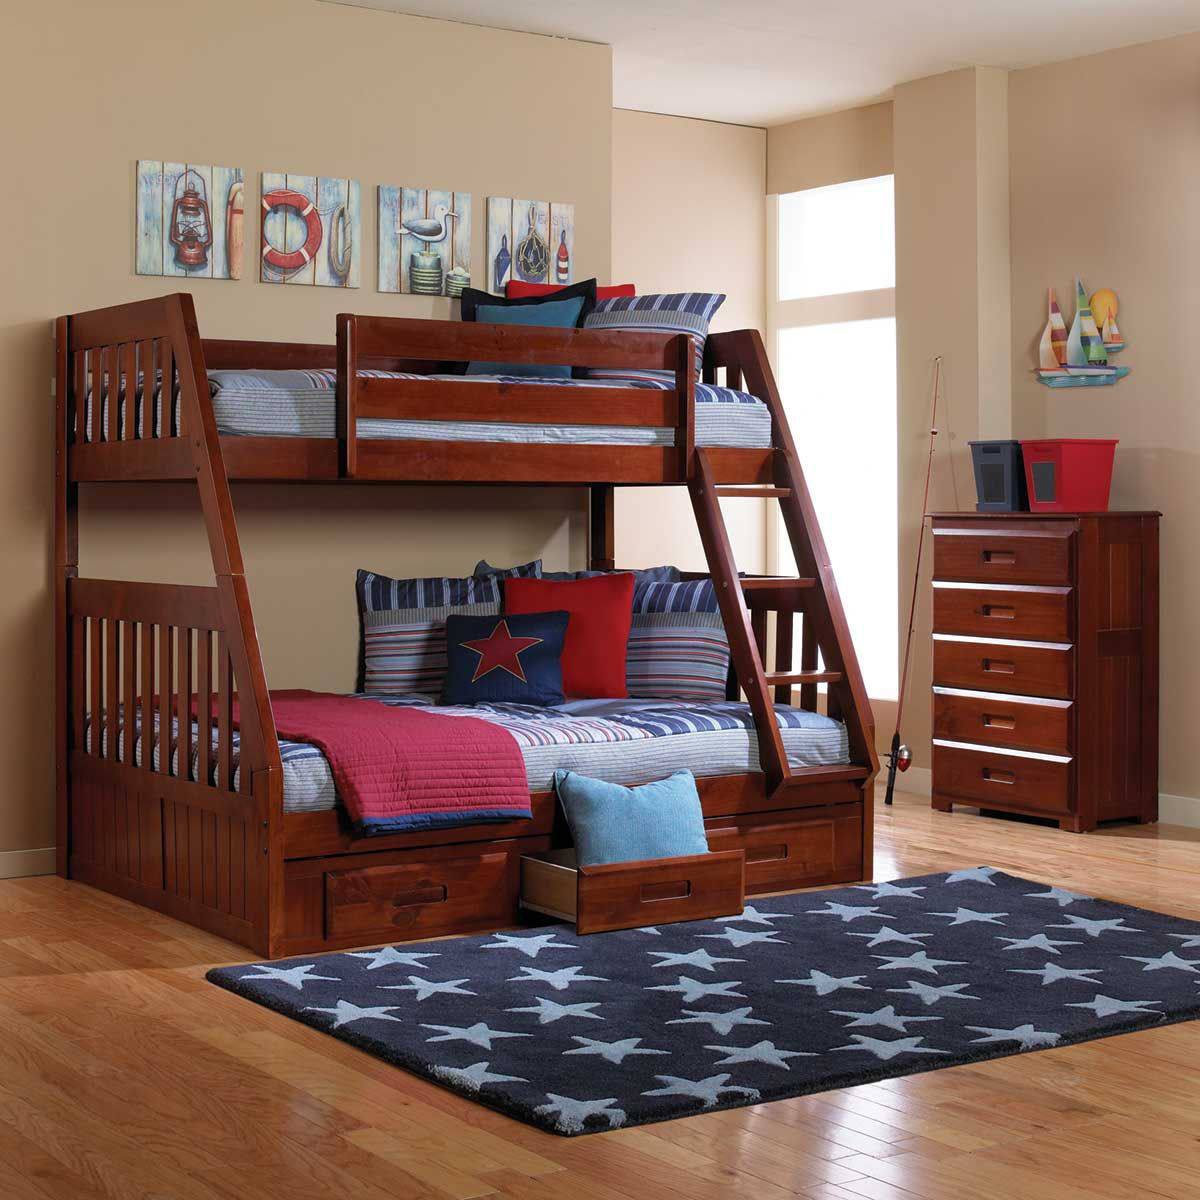 Forrester Twin Full Bunk Bed Bad, Twin Over Bunk Beds With Storage